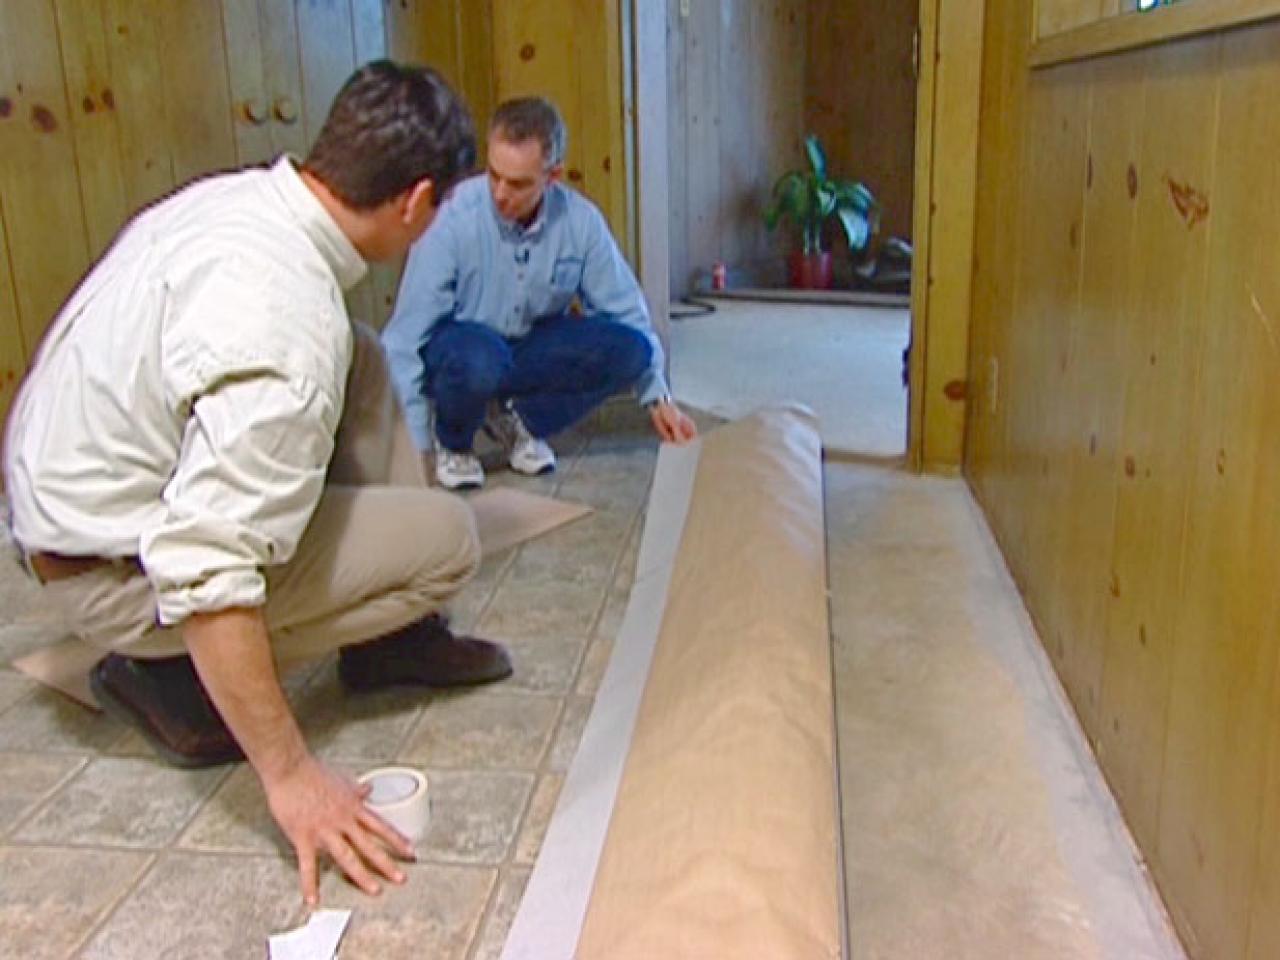 How To Install Vinyl Flooring Tos, How To Lay Sheet Vinyl Flooring On Plywood